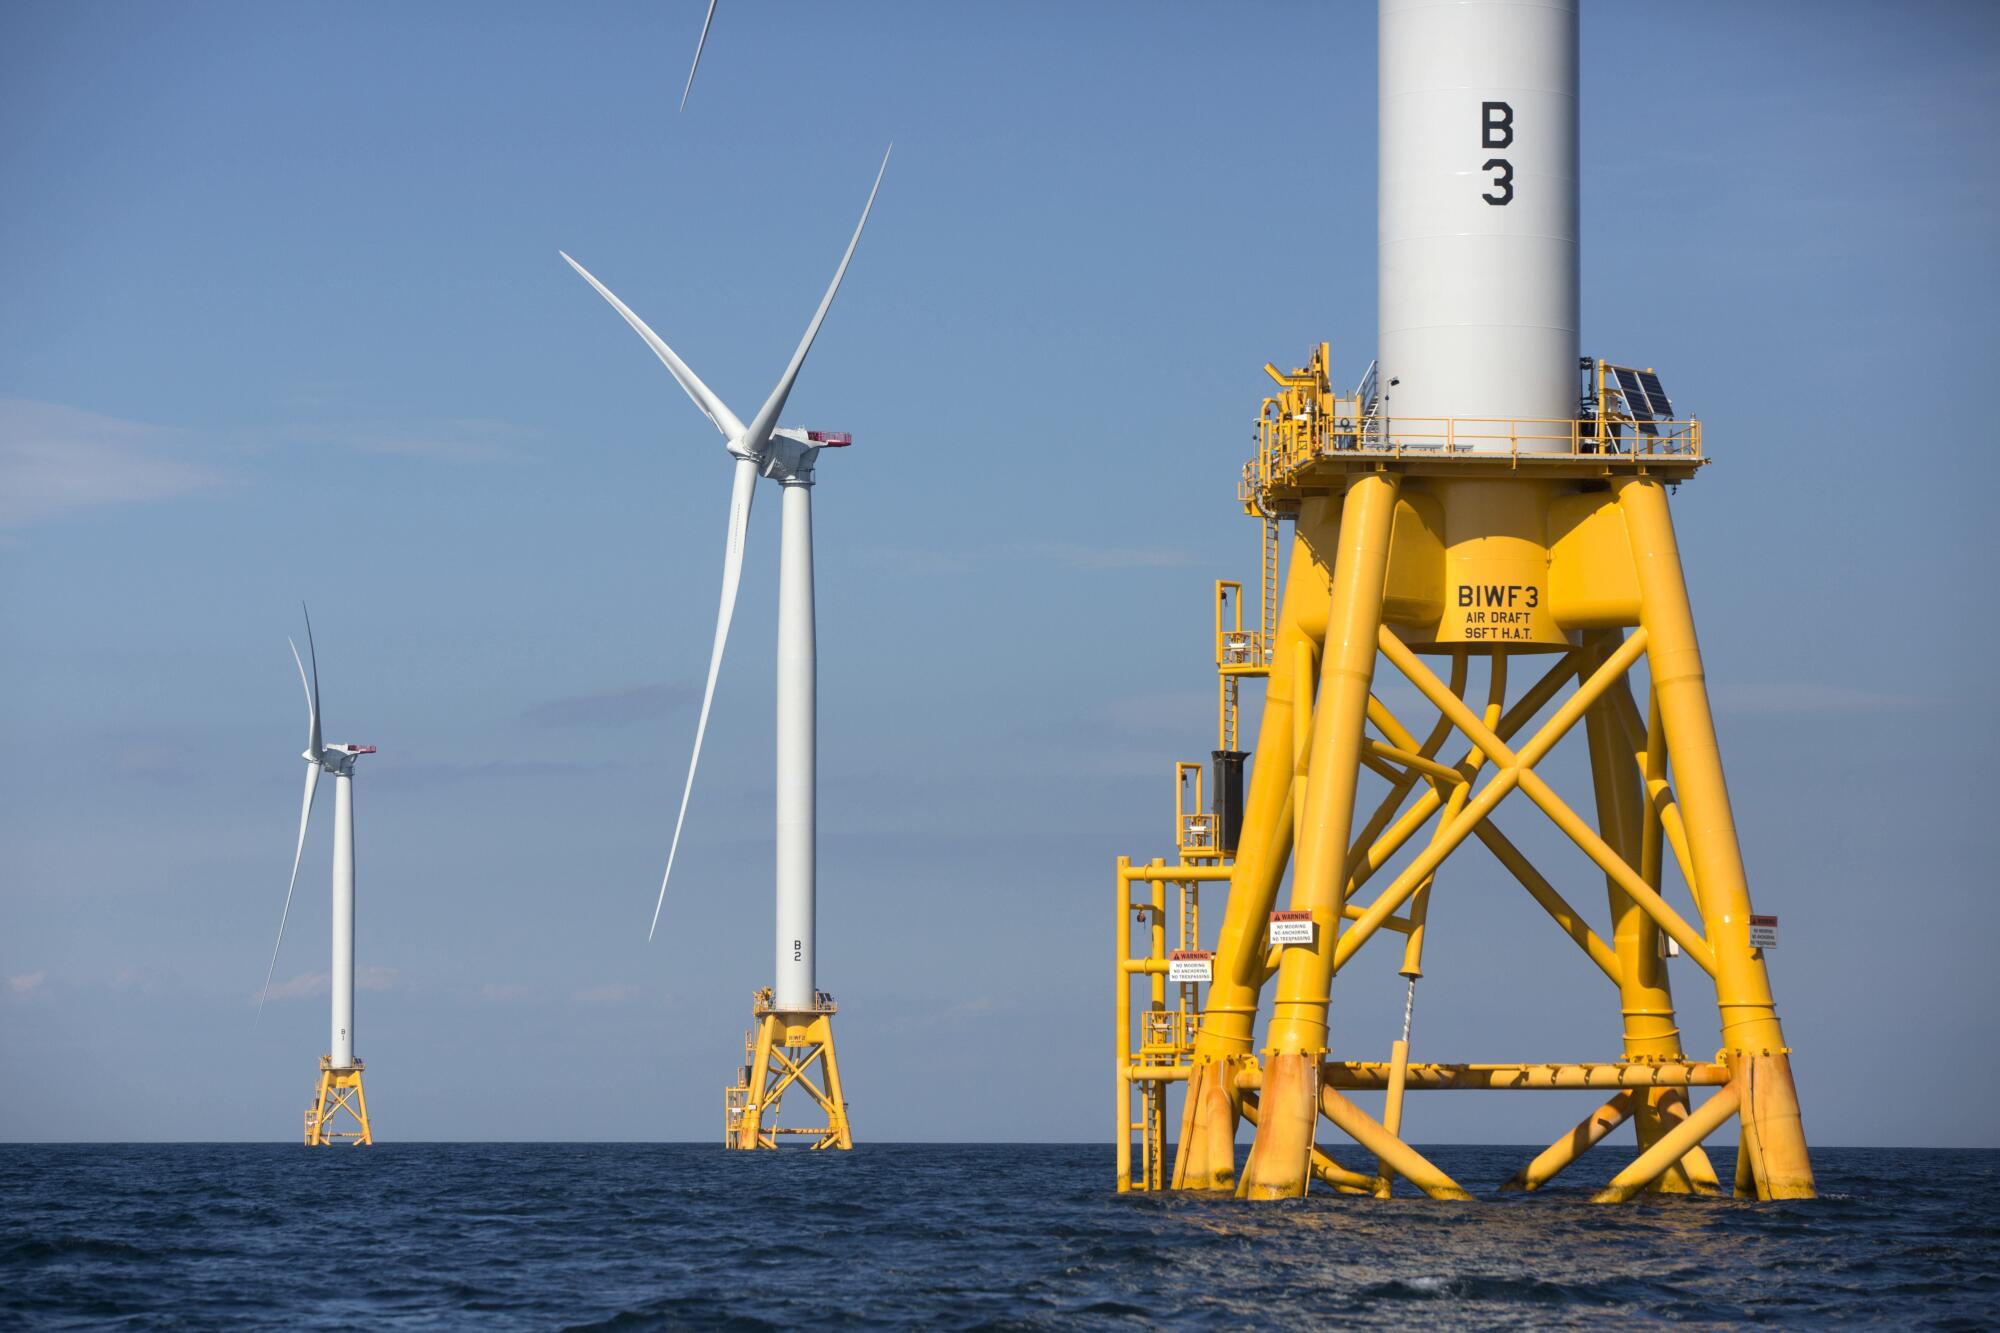 Three offshore wind turbines rise from a calm sea.